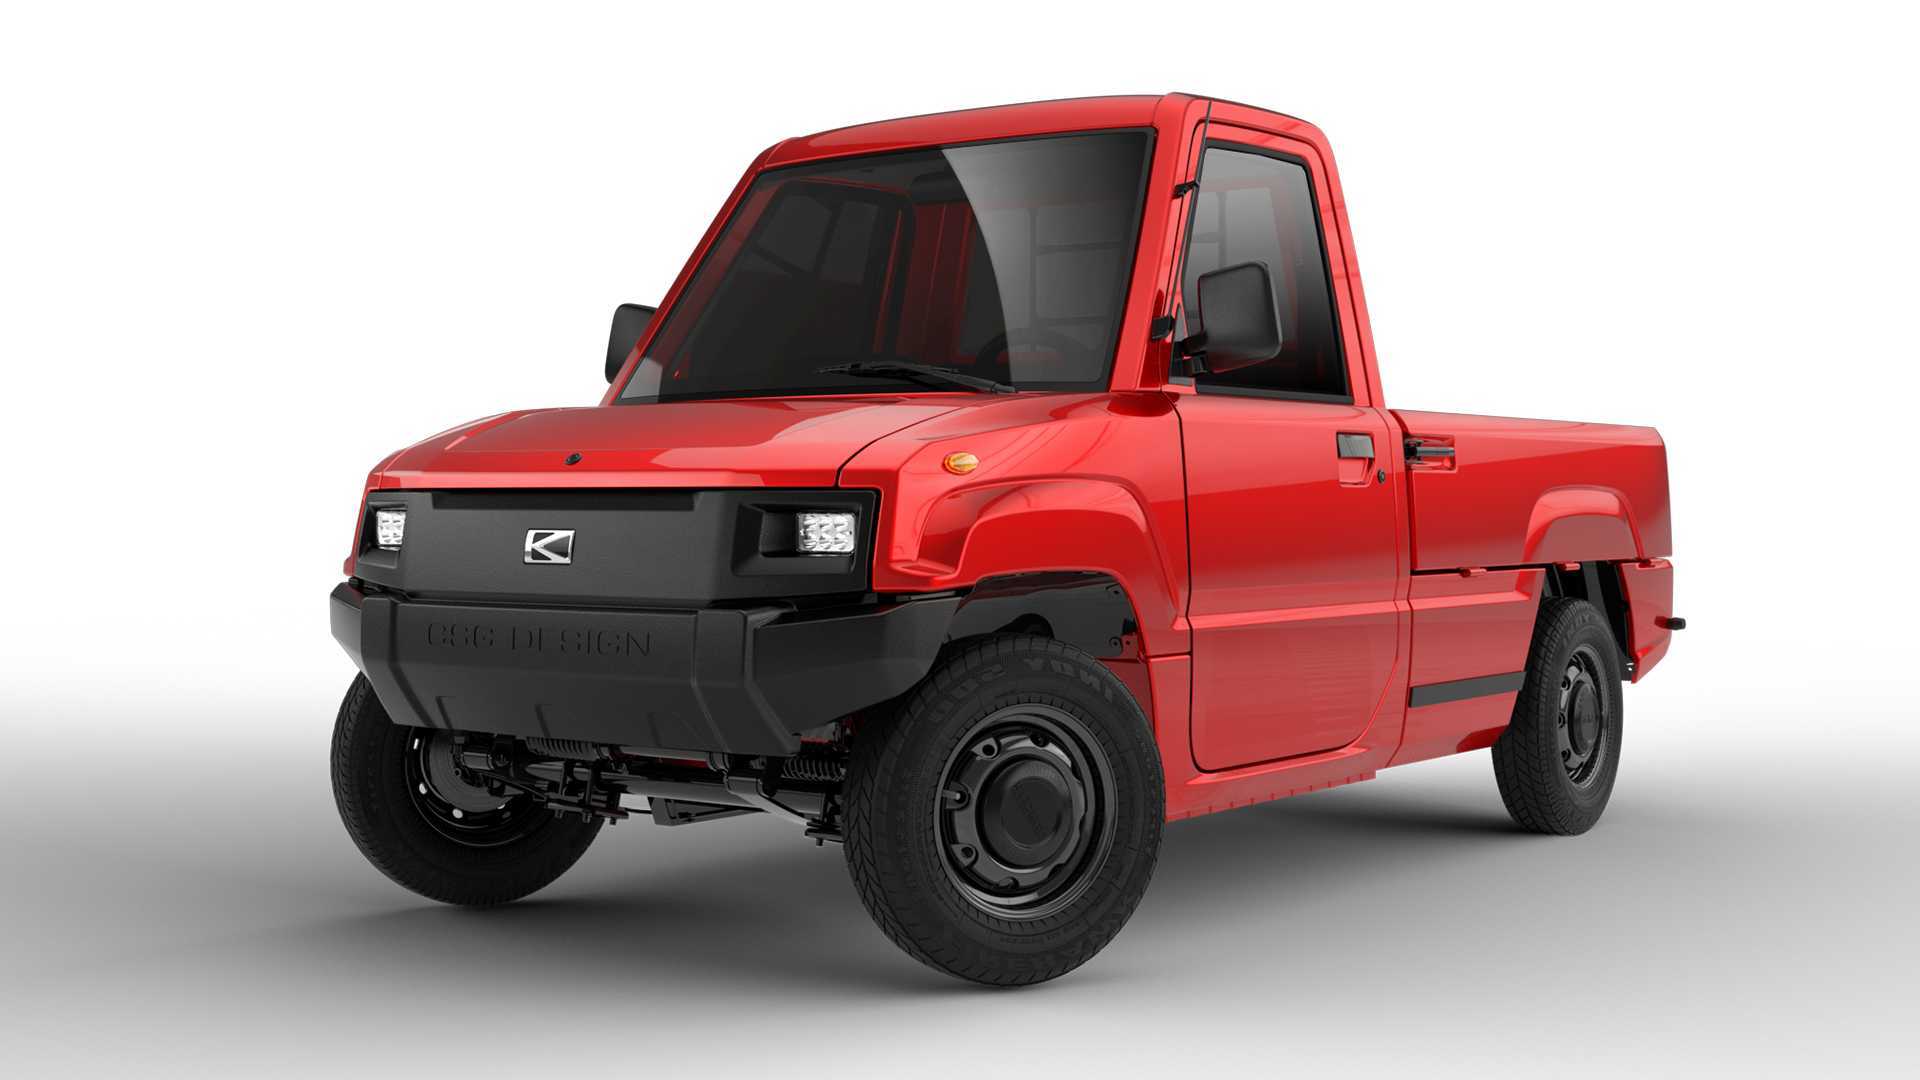 Prices of No 1 Chinese small trucks  Late 2019  Tipper trucks  YouTube